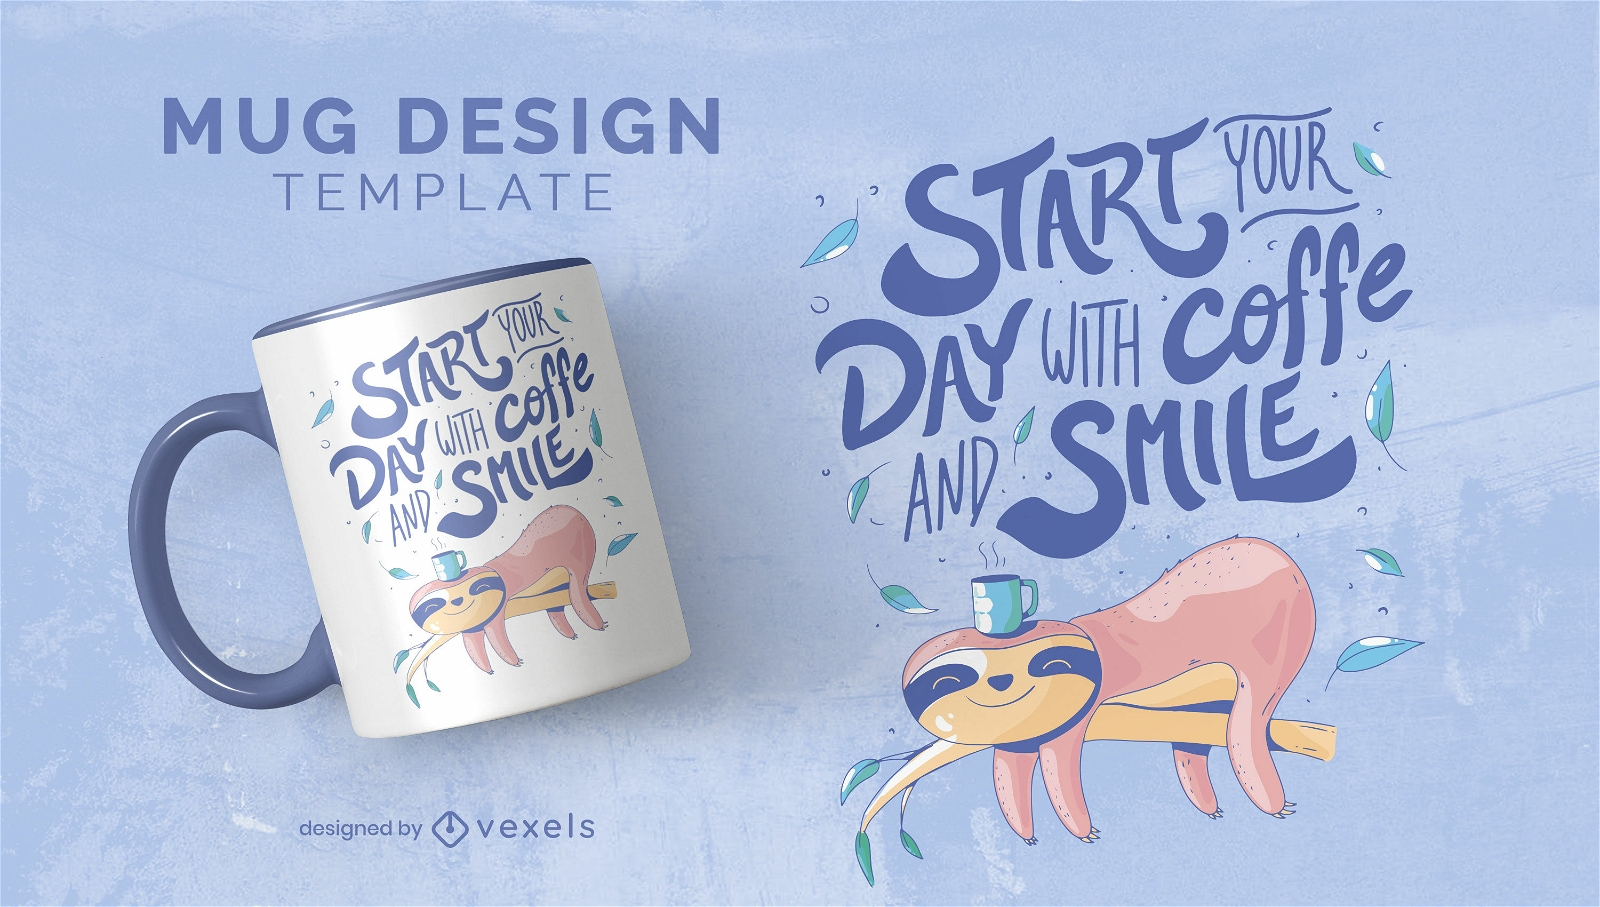 https://images.vexels.com/content/272350/preview/coffee-and-smile-lettering-mug-design-18dd75.png